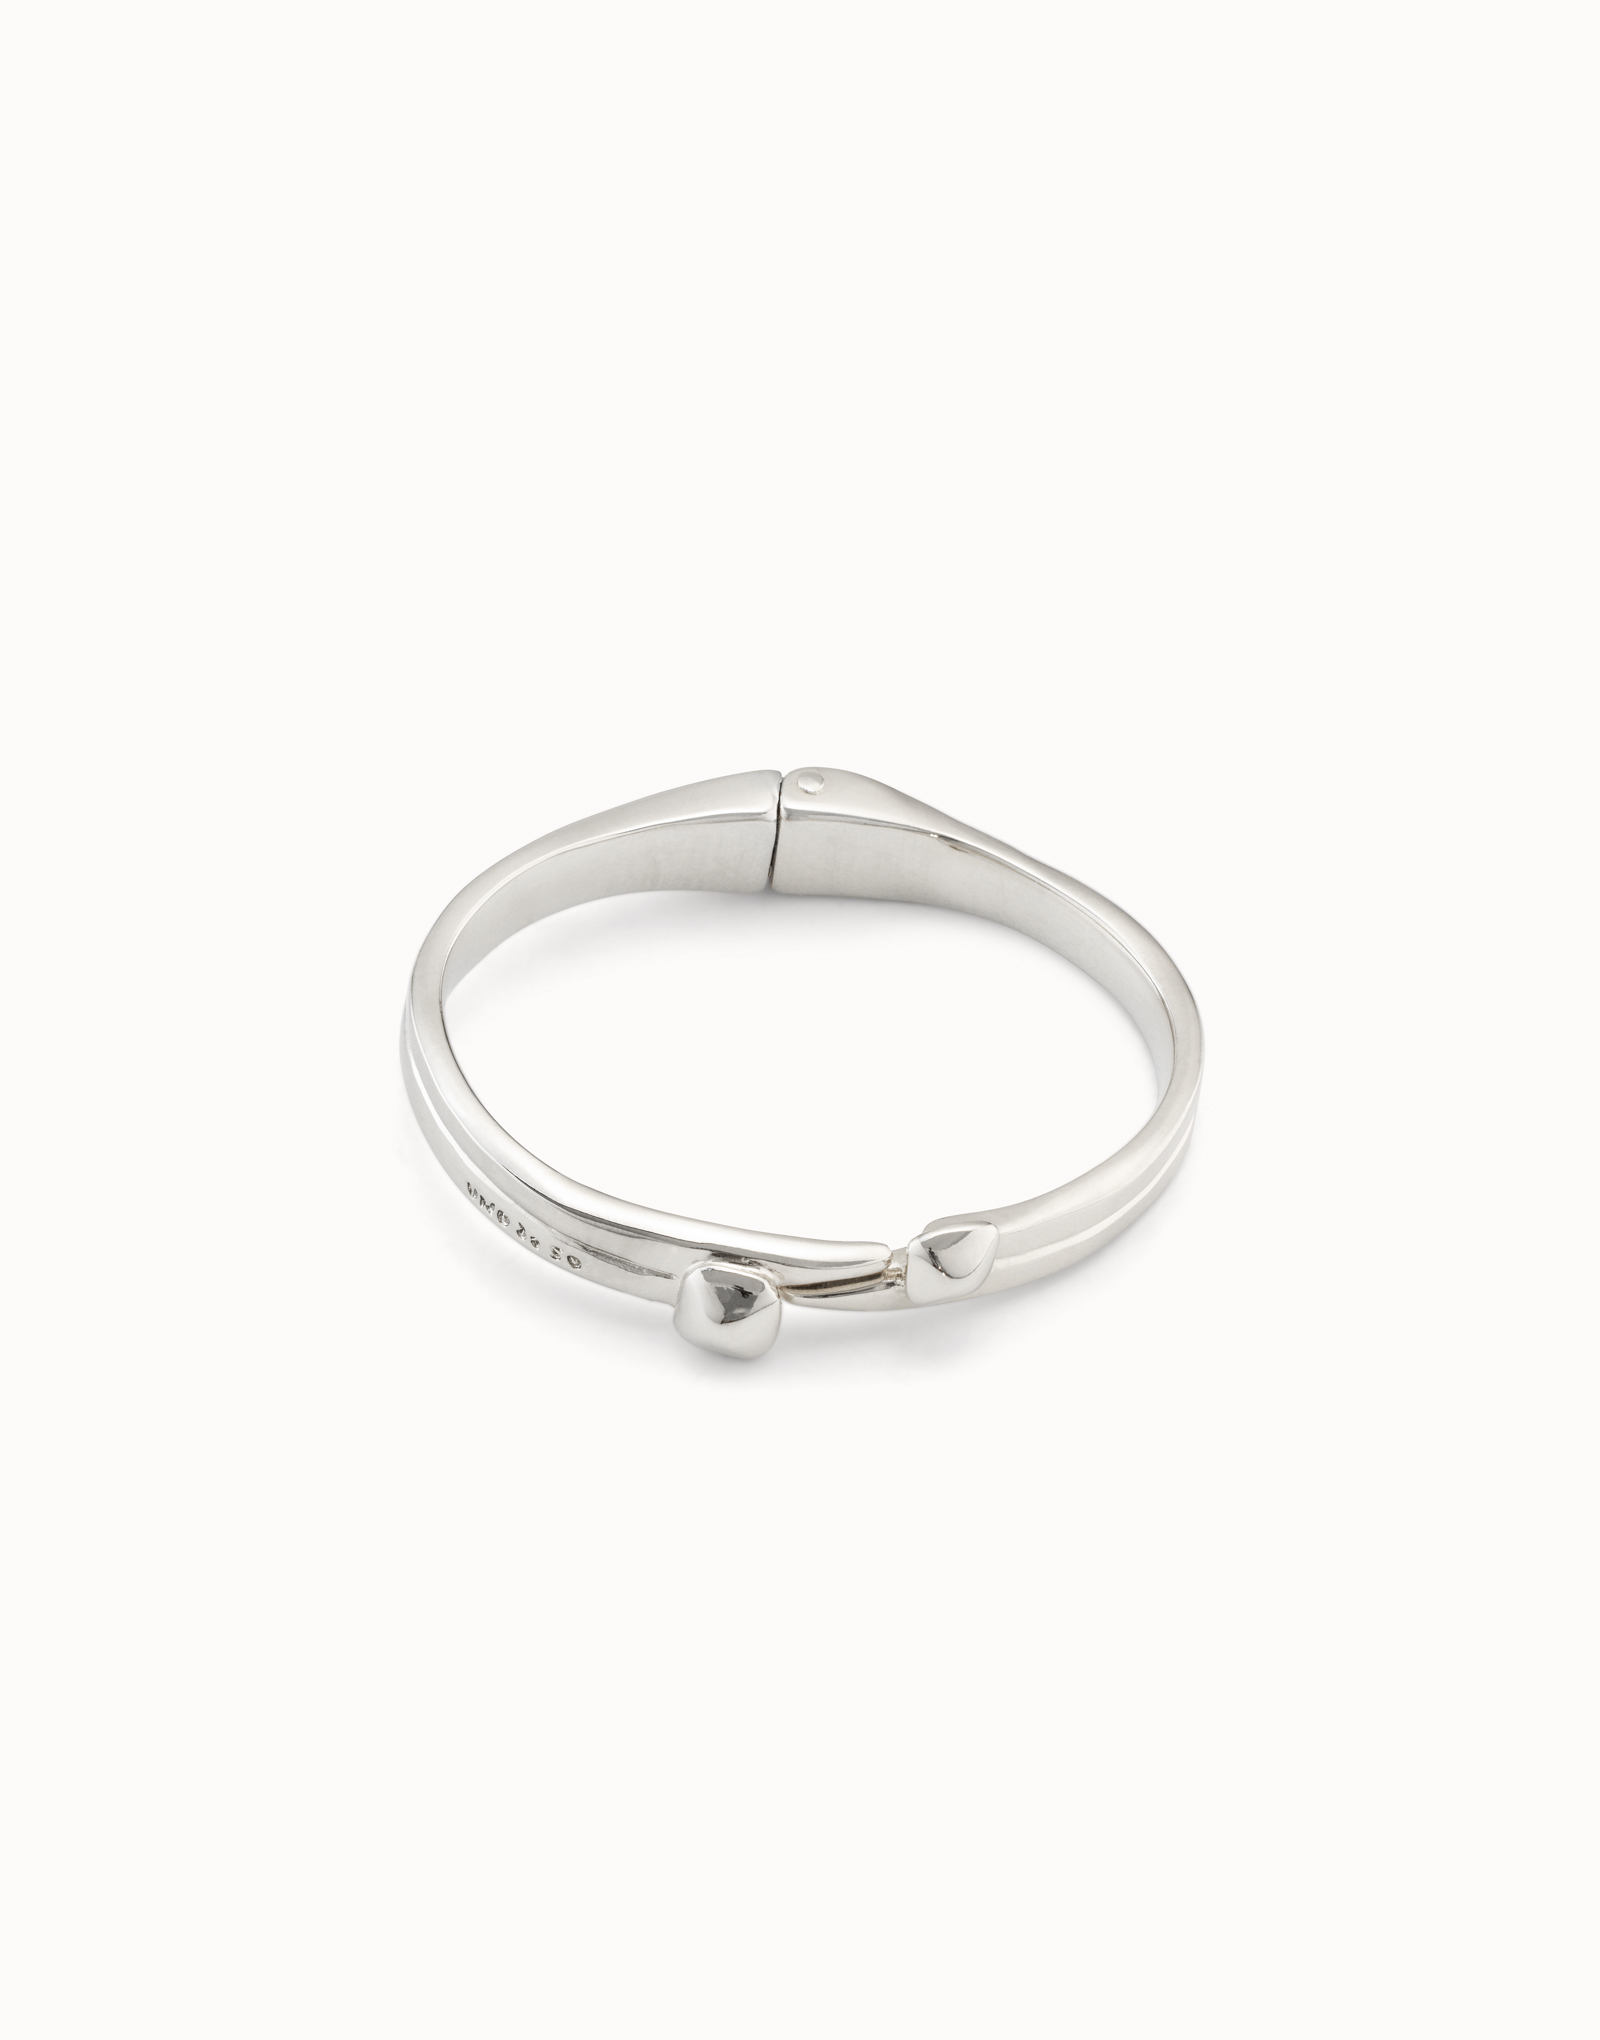 Sterling silver-plated nail shaped bracelet with hidden spring, Silver, large image number null